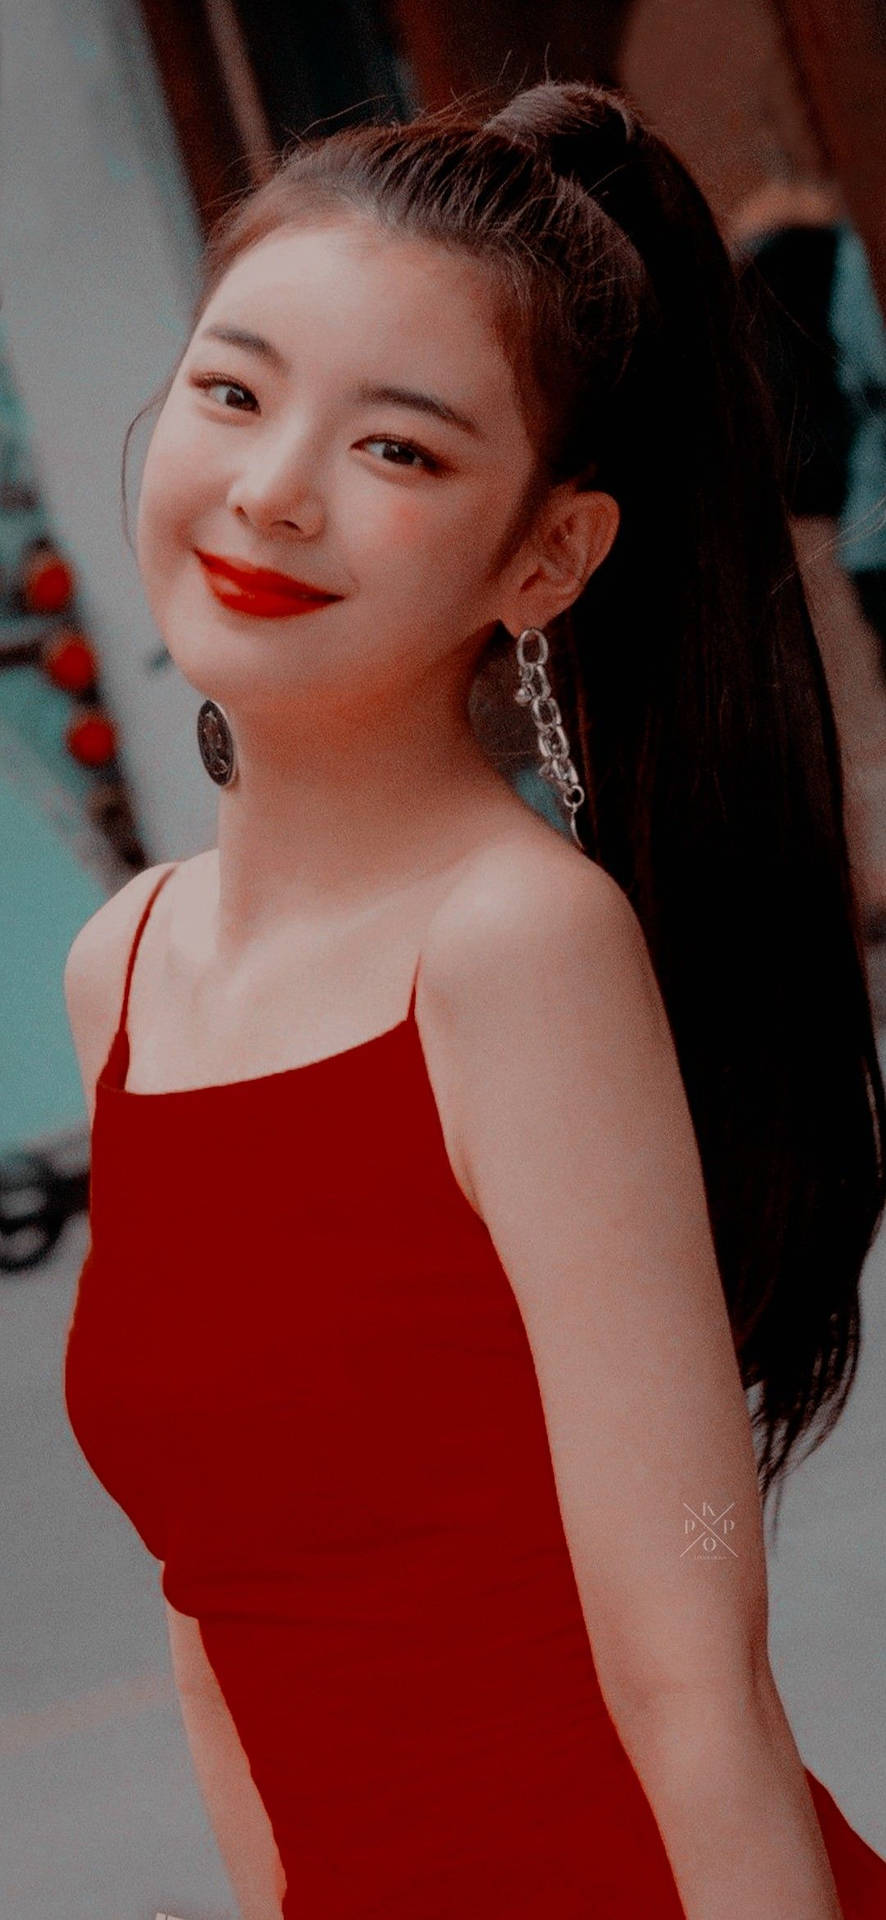 Itzy Lia In Red Dress Background